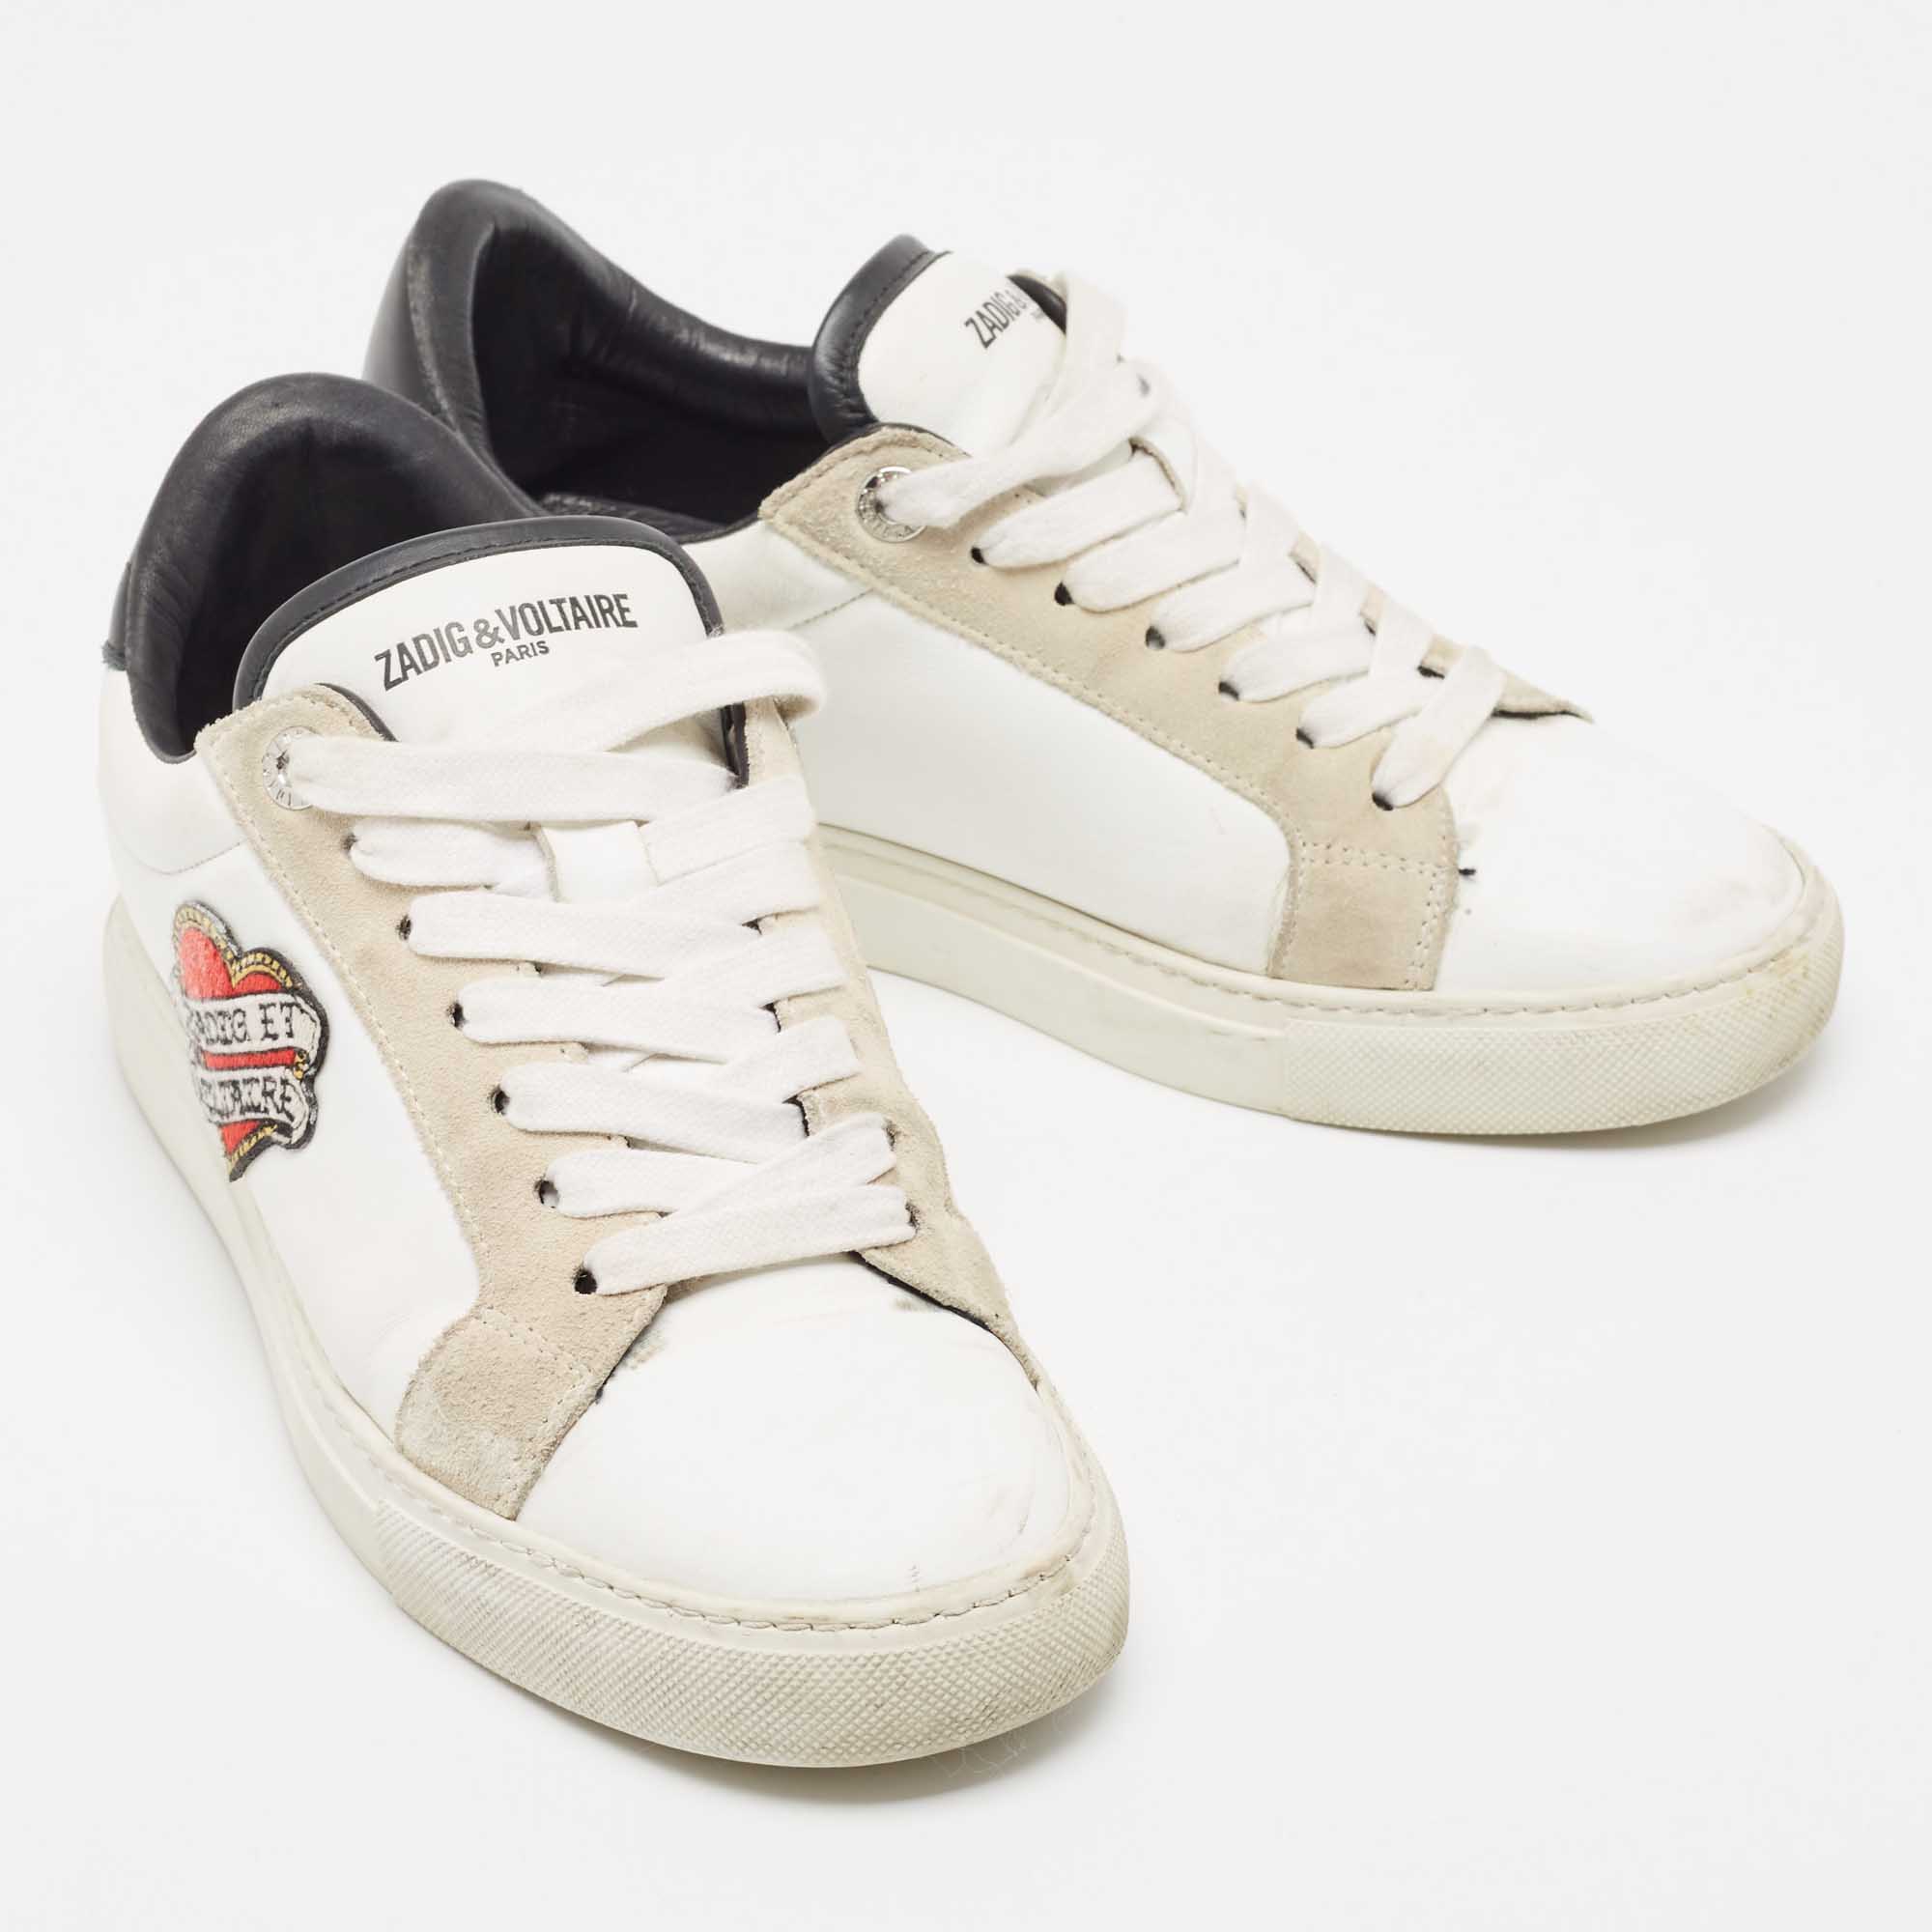 Zadig & Voltaire White Low Top Sneakers Size 38